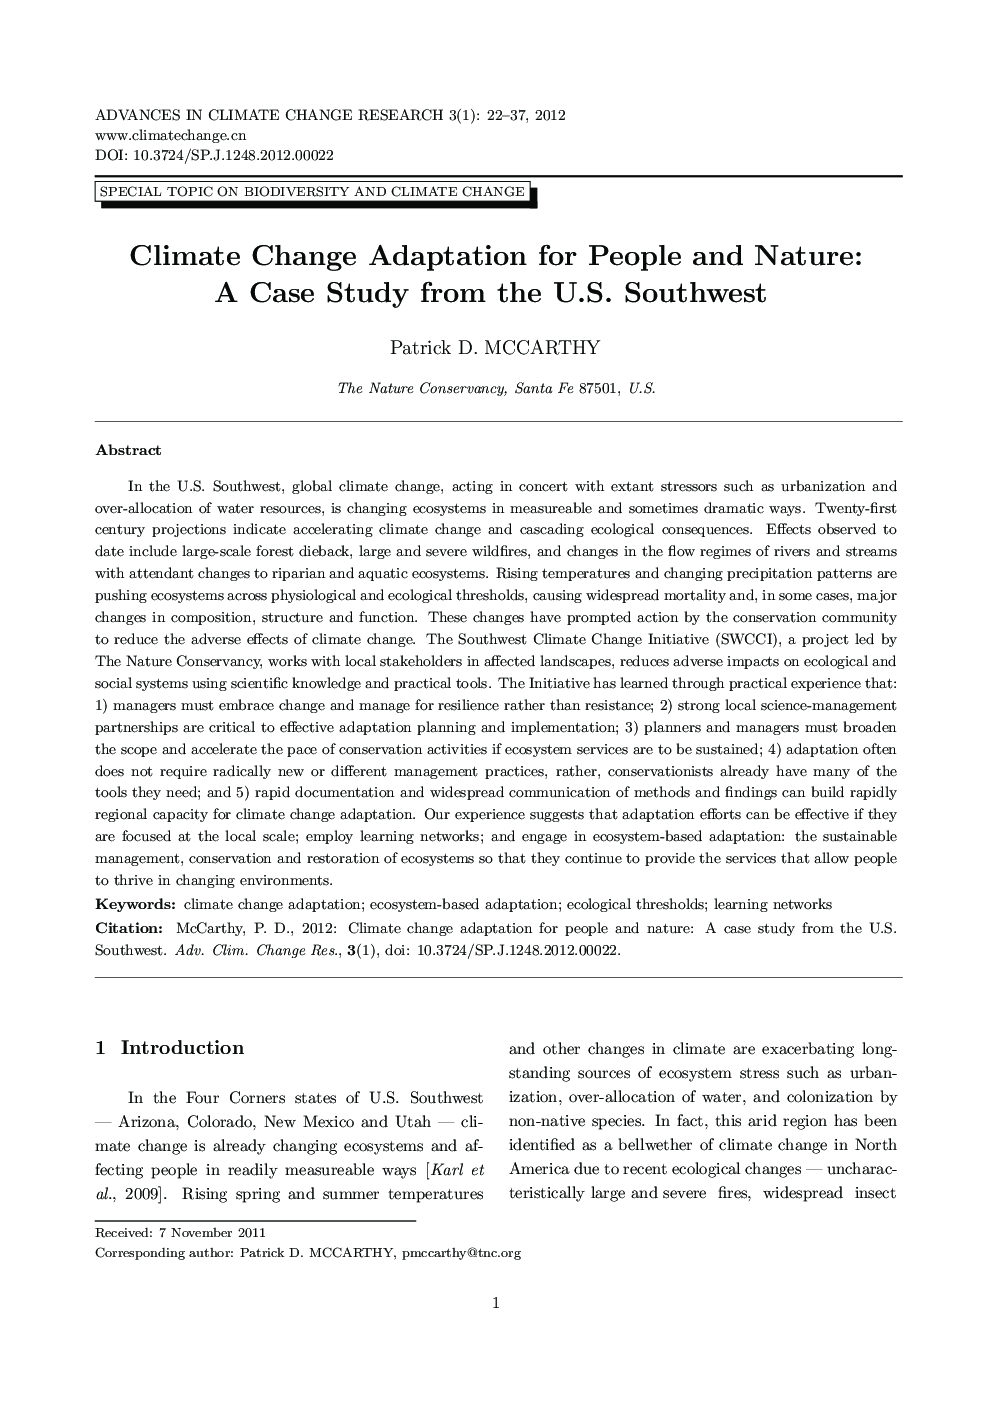 Climate Change Adaptation for People and Nature: A Case Study from the U.S. Southwest